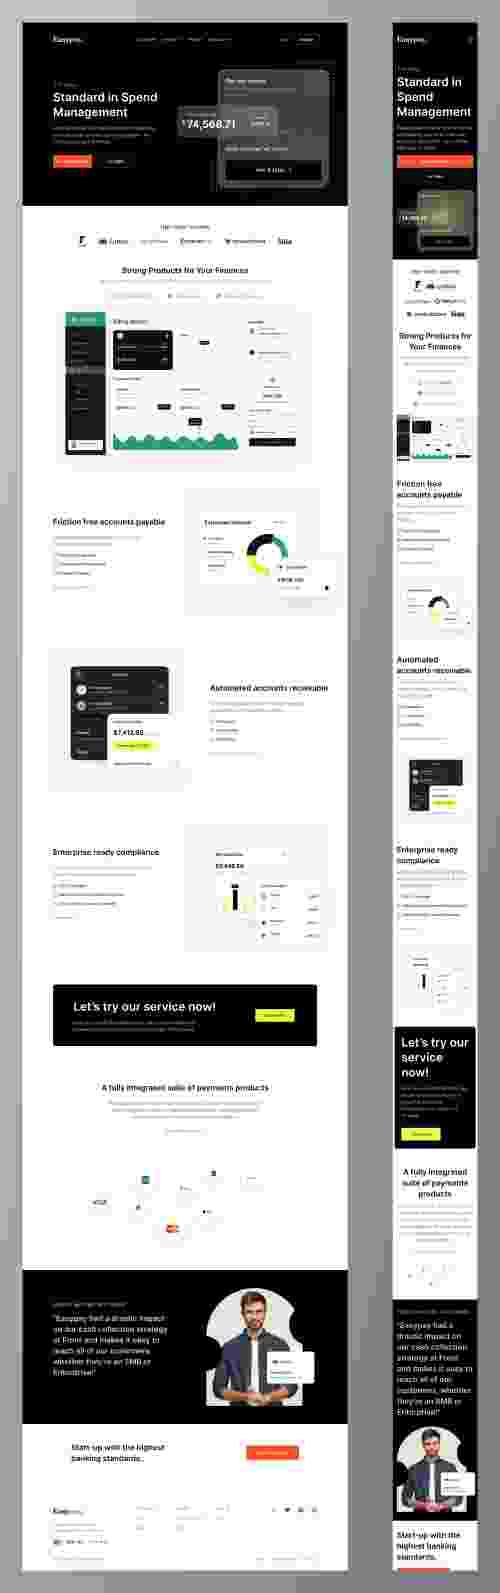 UIHut - Easypay Payment Web Template - 19375